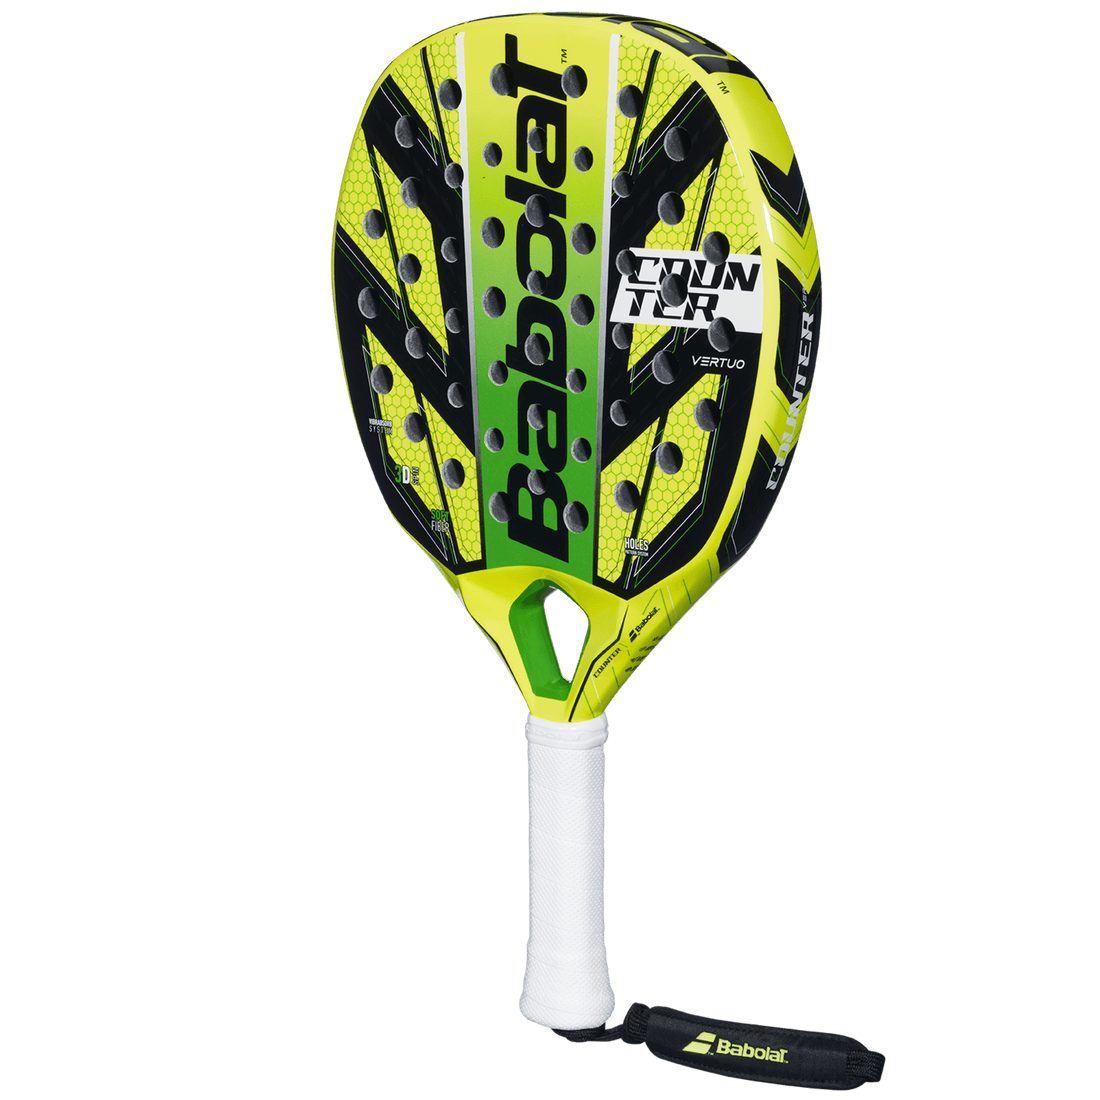 A padel racket for counter-attacking players.